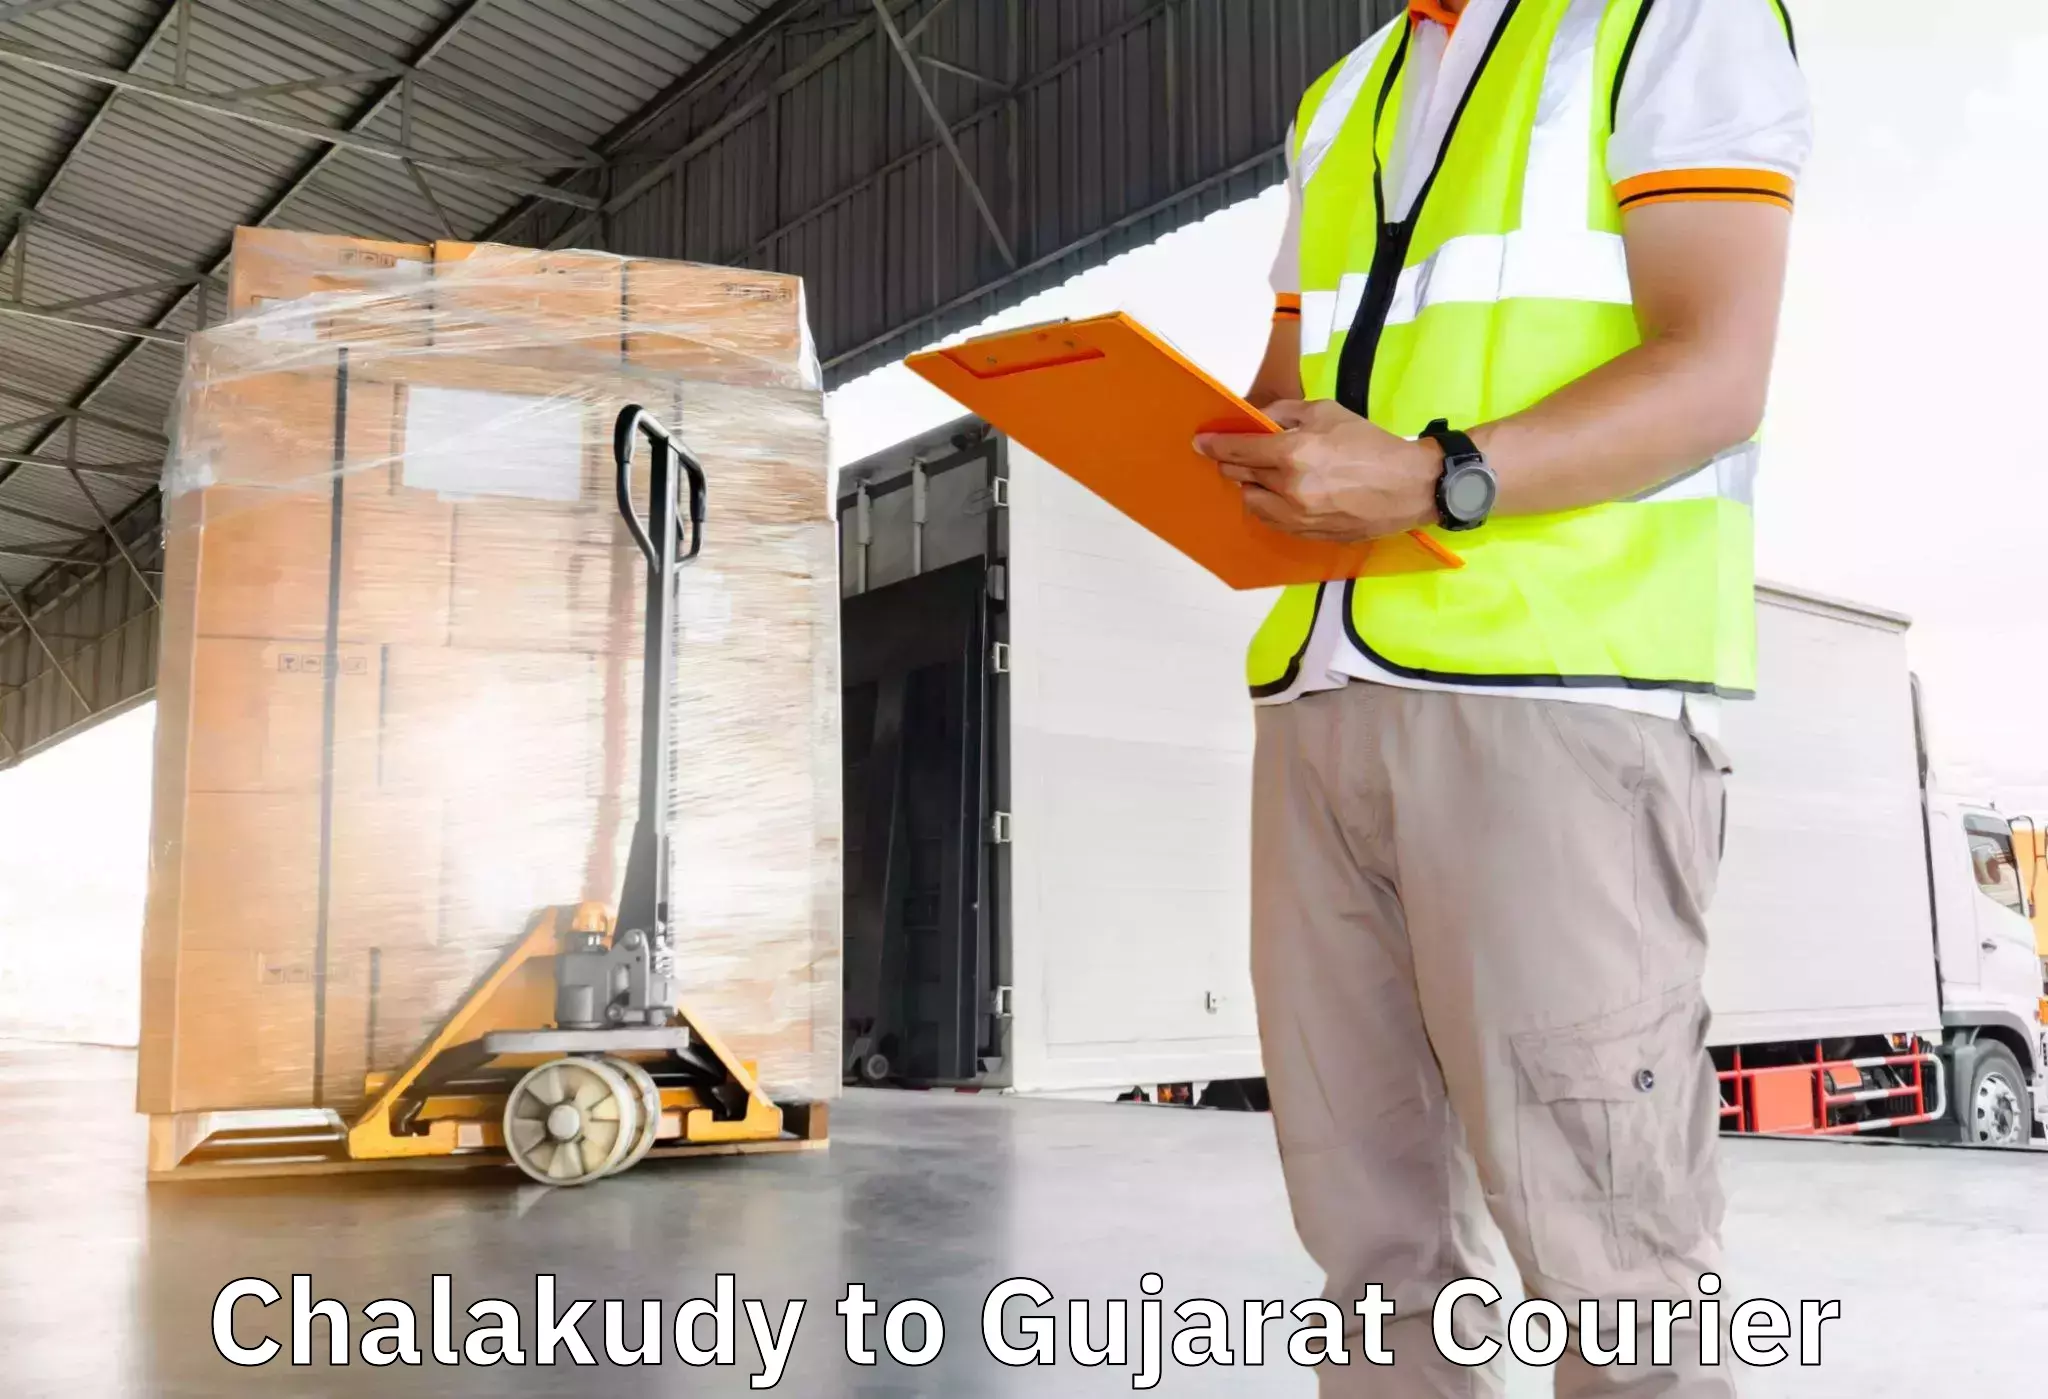 Furniture moving experts Chalakudy to Vijapur